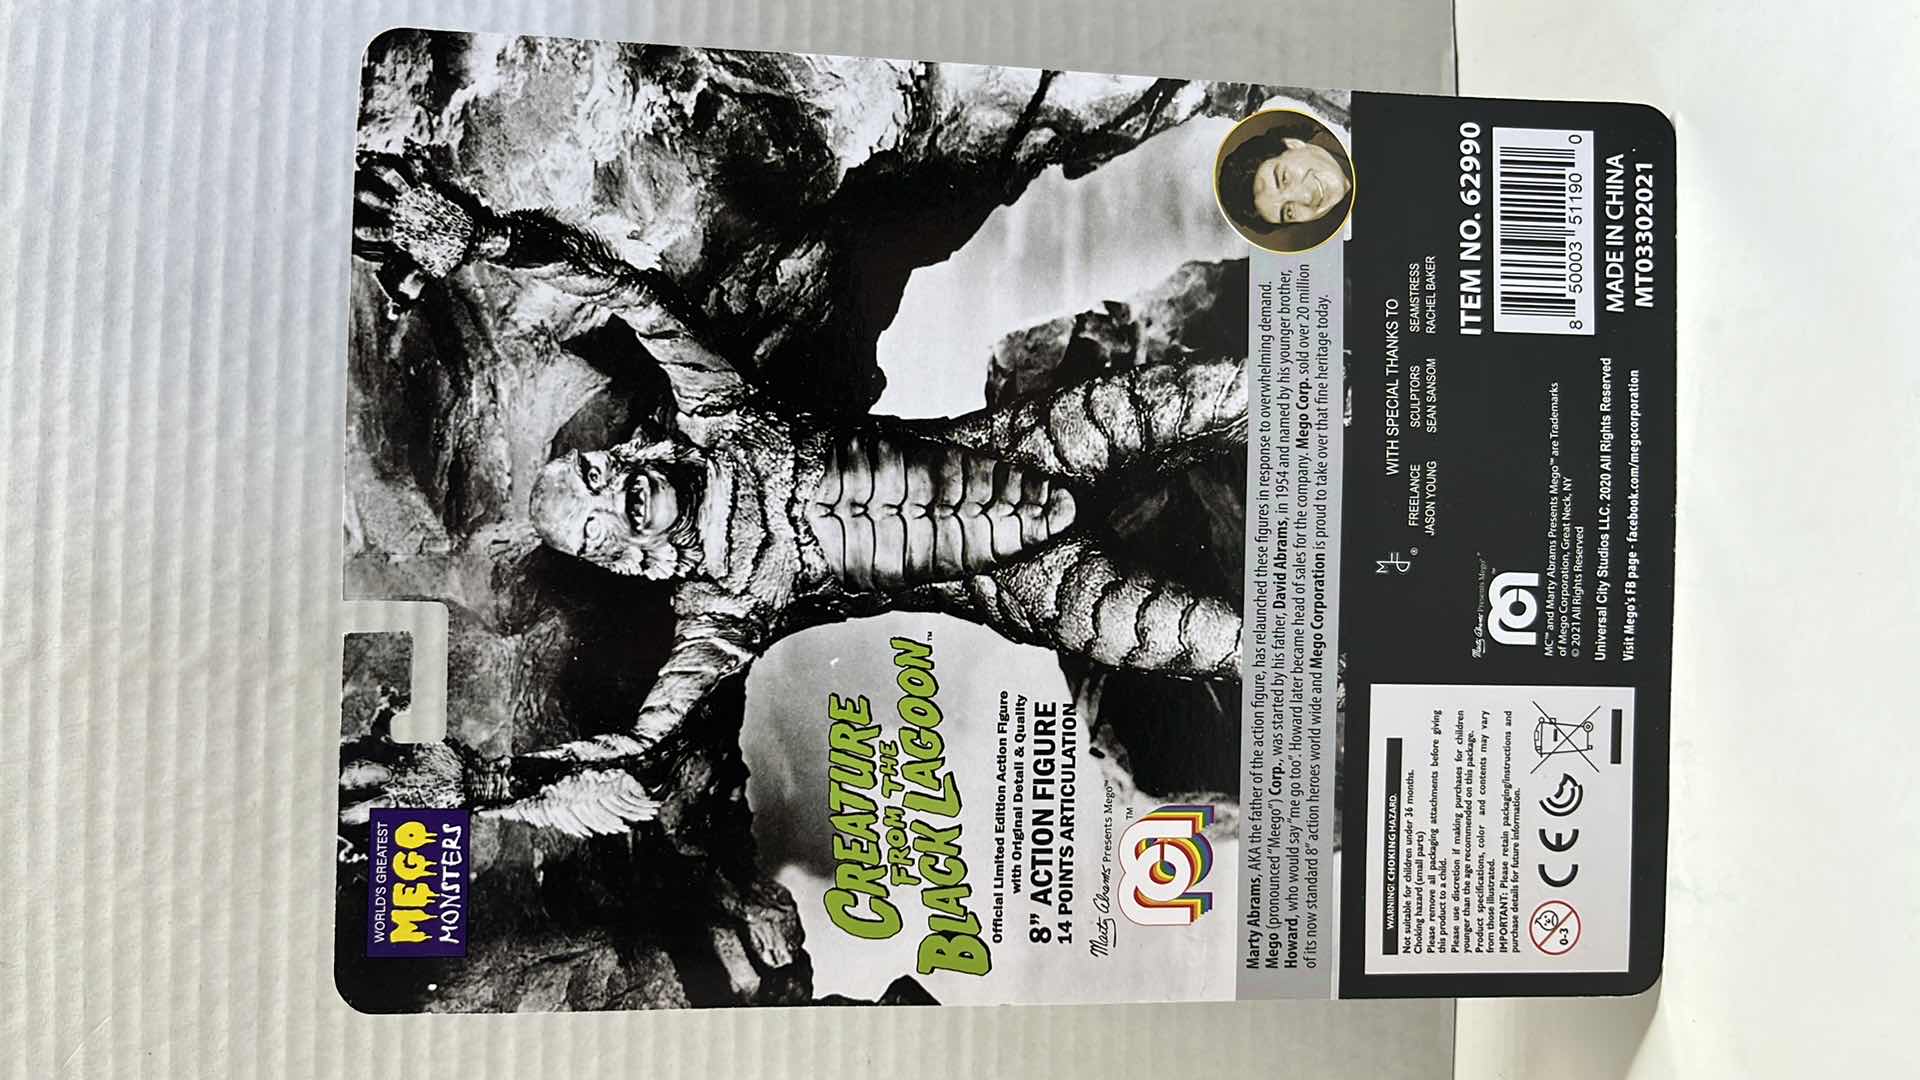 Photo 3 of NIB WORLDS GREATEST MEGO MONSTERS 8” ACTION FIGURE, CREATURE FROM THE BLACK LAGOON & DR. JEKYLL MR. HYDE (2)